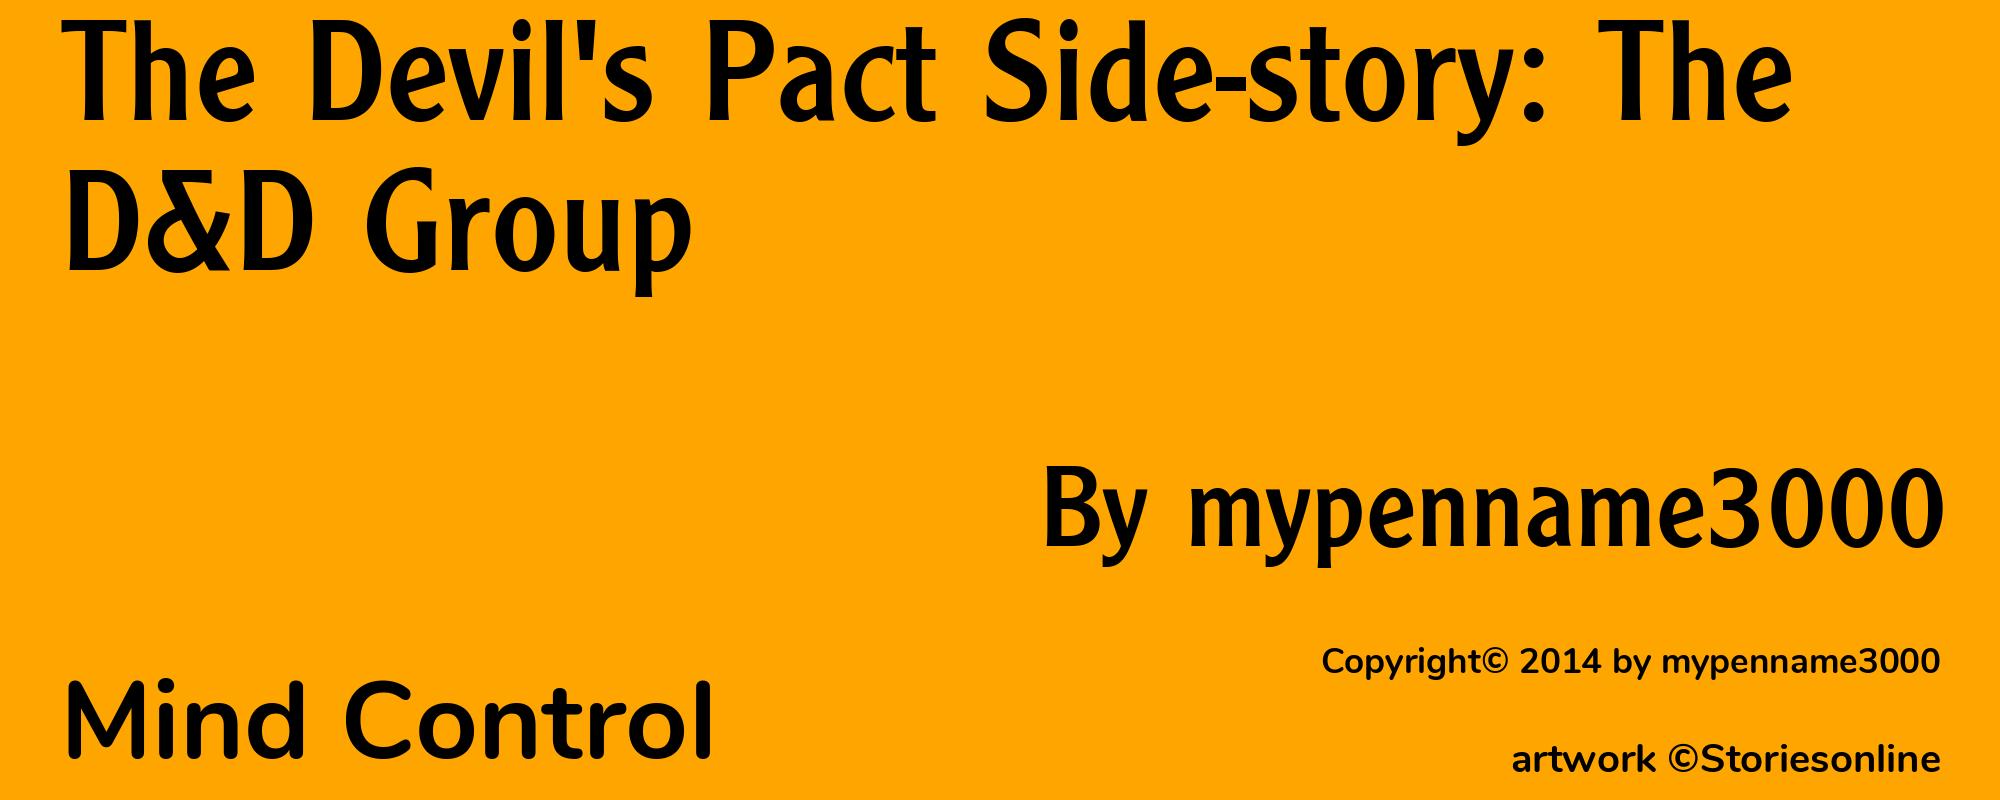 The Devil's Pact Side-story: The D&D Group - Cover